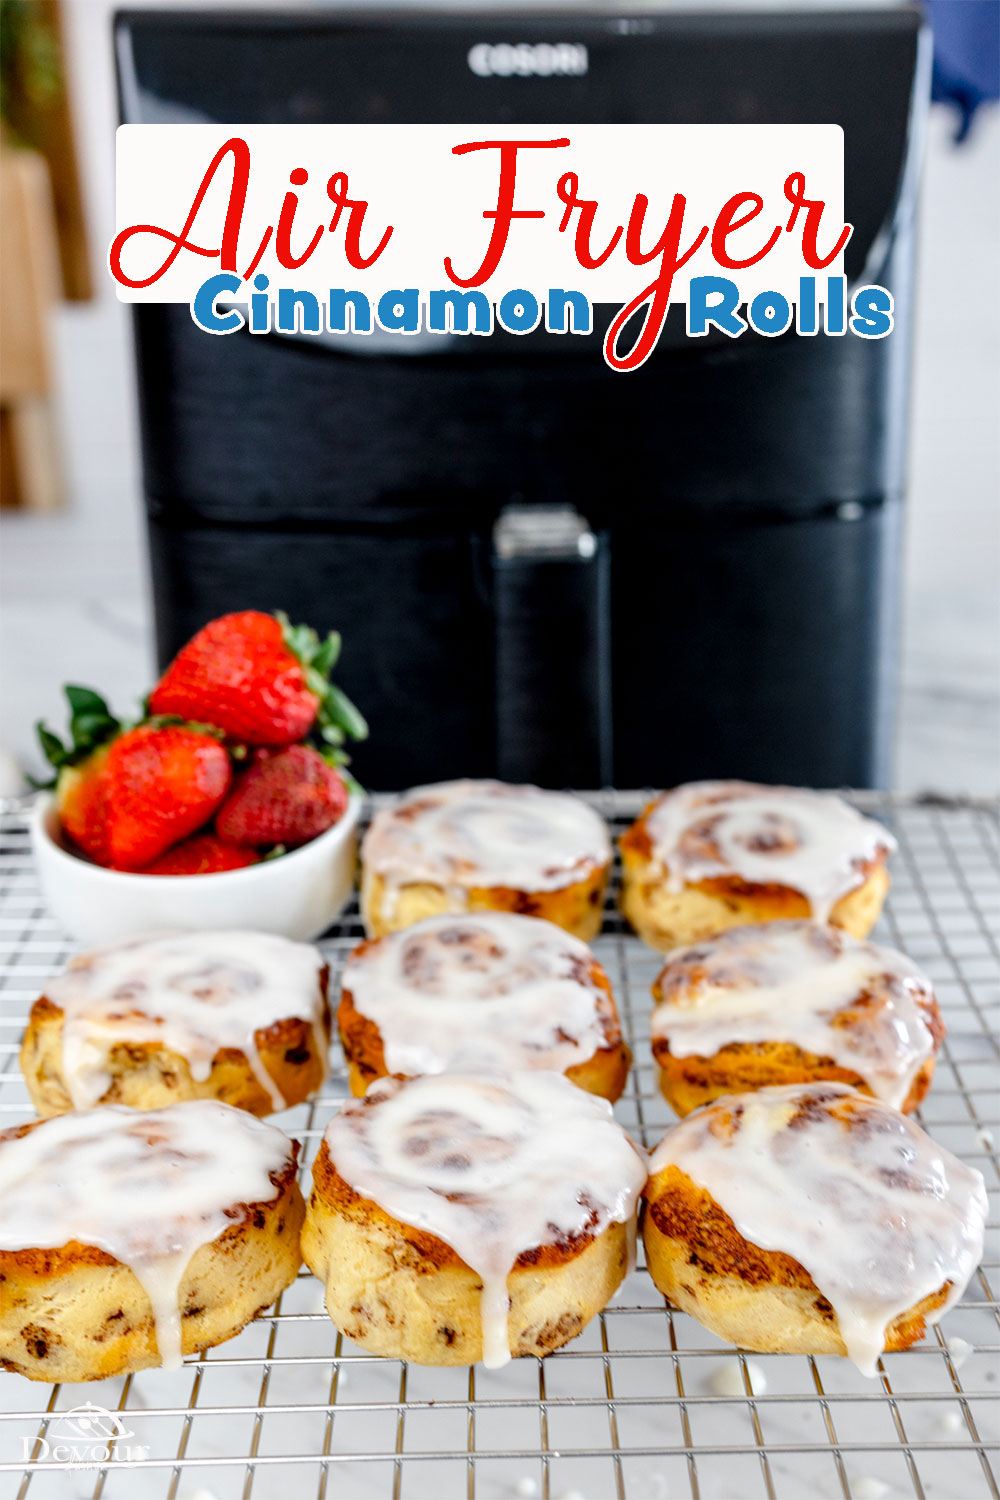 There's nothing quite like waking up to the smell of freshly made Cinnamon Rolls! A batch of these Pillsbury Air Fryer Cinnamon Rolls only takes 6 minutes to make - perfect for a quick breakfast on the go, or for an afternoon snack!